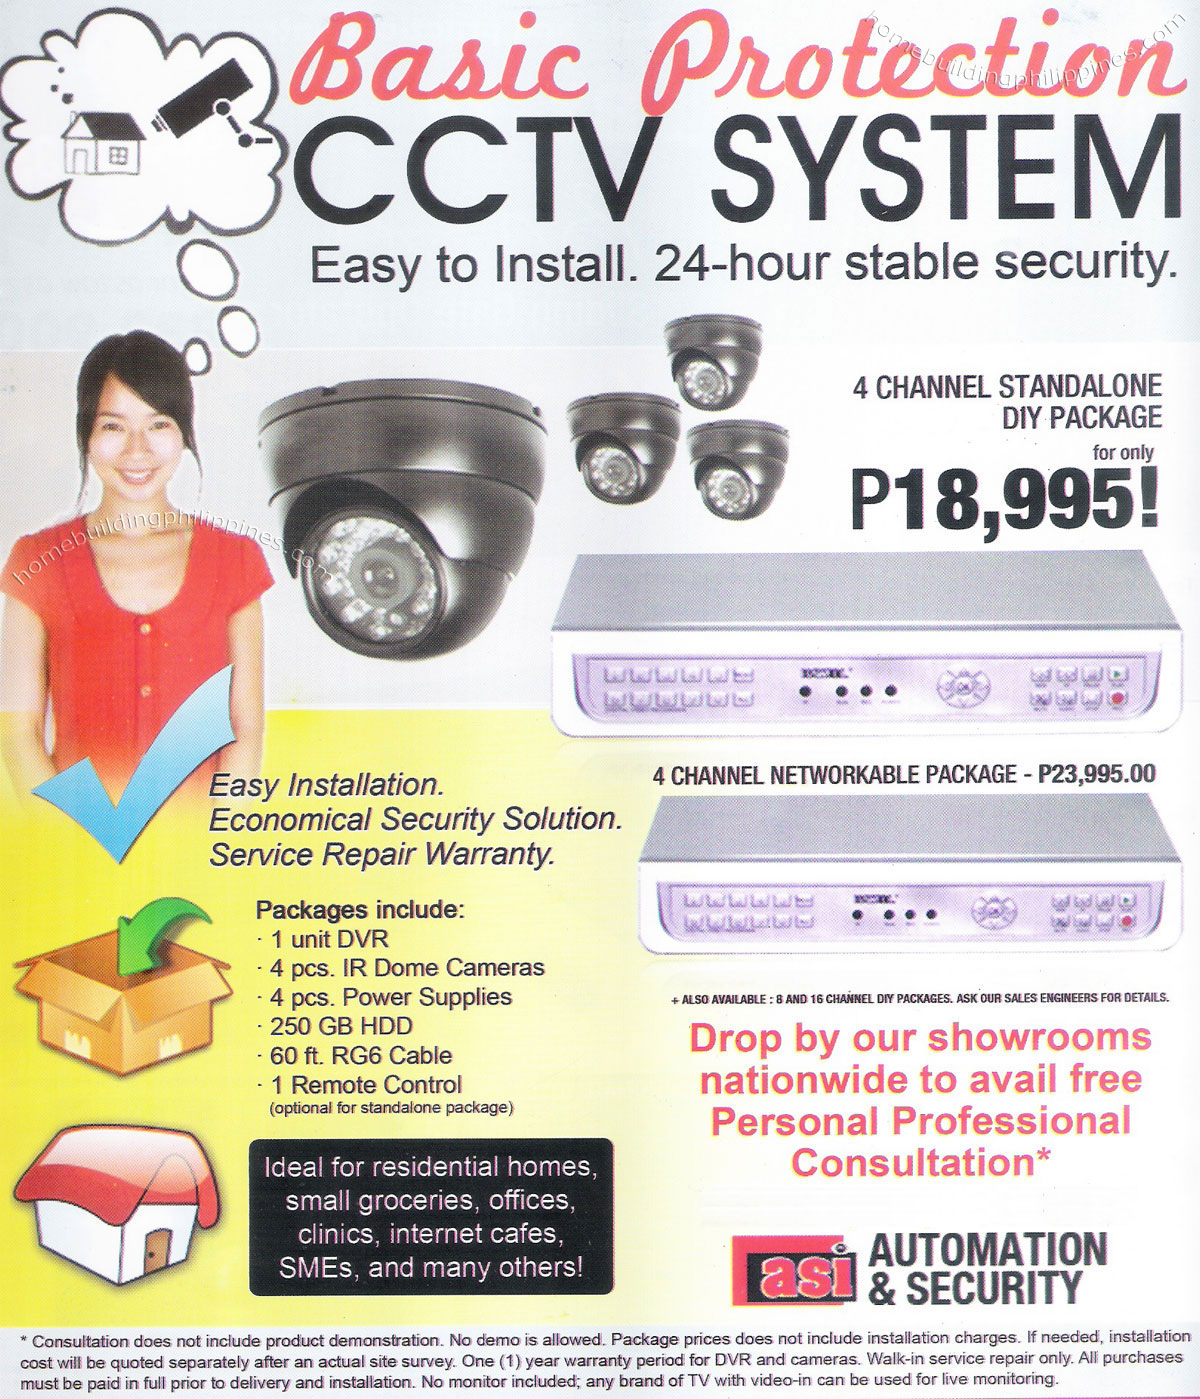 Home Office Basic Protection CCTV System Easy-to-Install 24-Hour Stable Security DIY Package